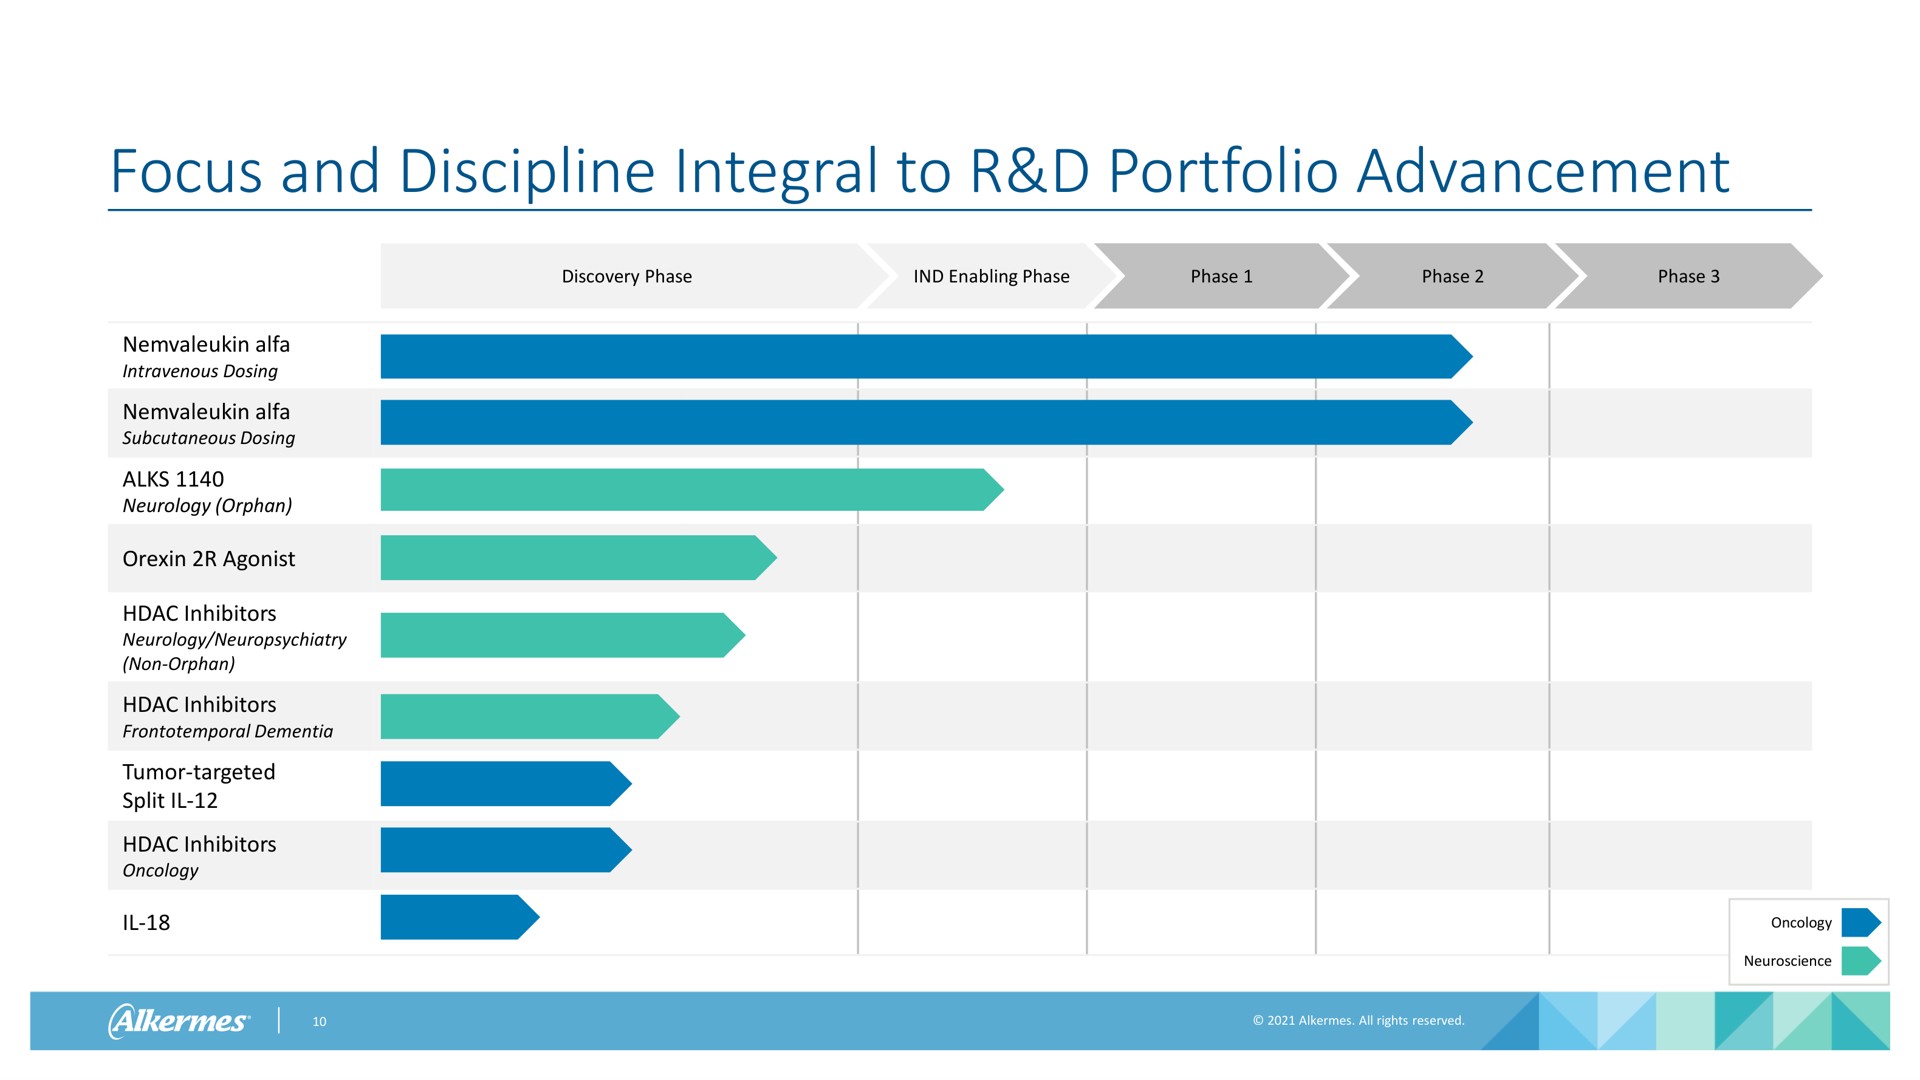 focus and discipline integral to portfolio advancement discovery phase enabling phase phase phase phase alfa intravenous dosing alfa subcutaneous dosing neurology orphan agonist inhibitors neurology neuropsychiatry non orphan inhibitors frontotemporal dementia tumor targeted split inhibitors oncology oncology | Alkermes